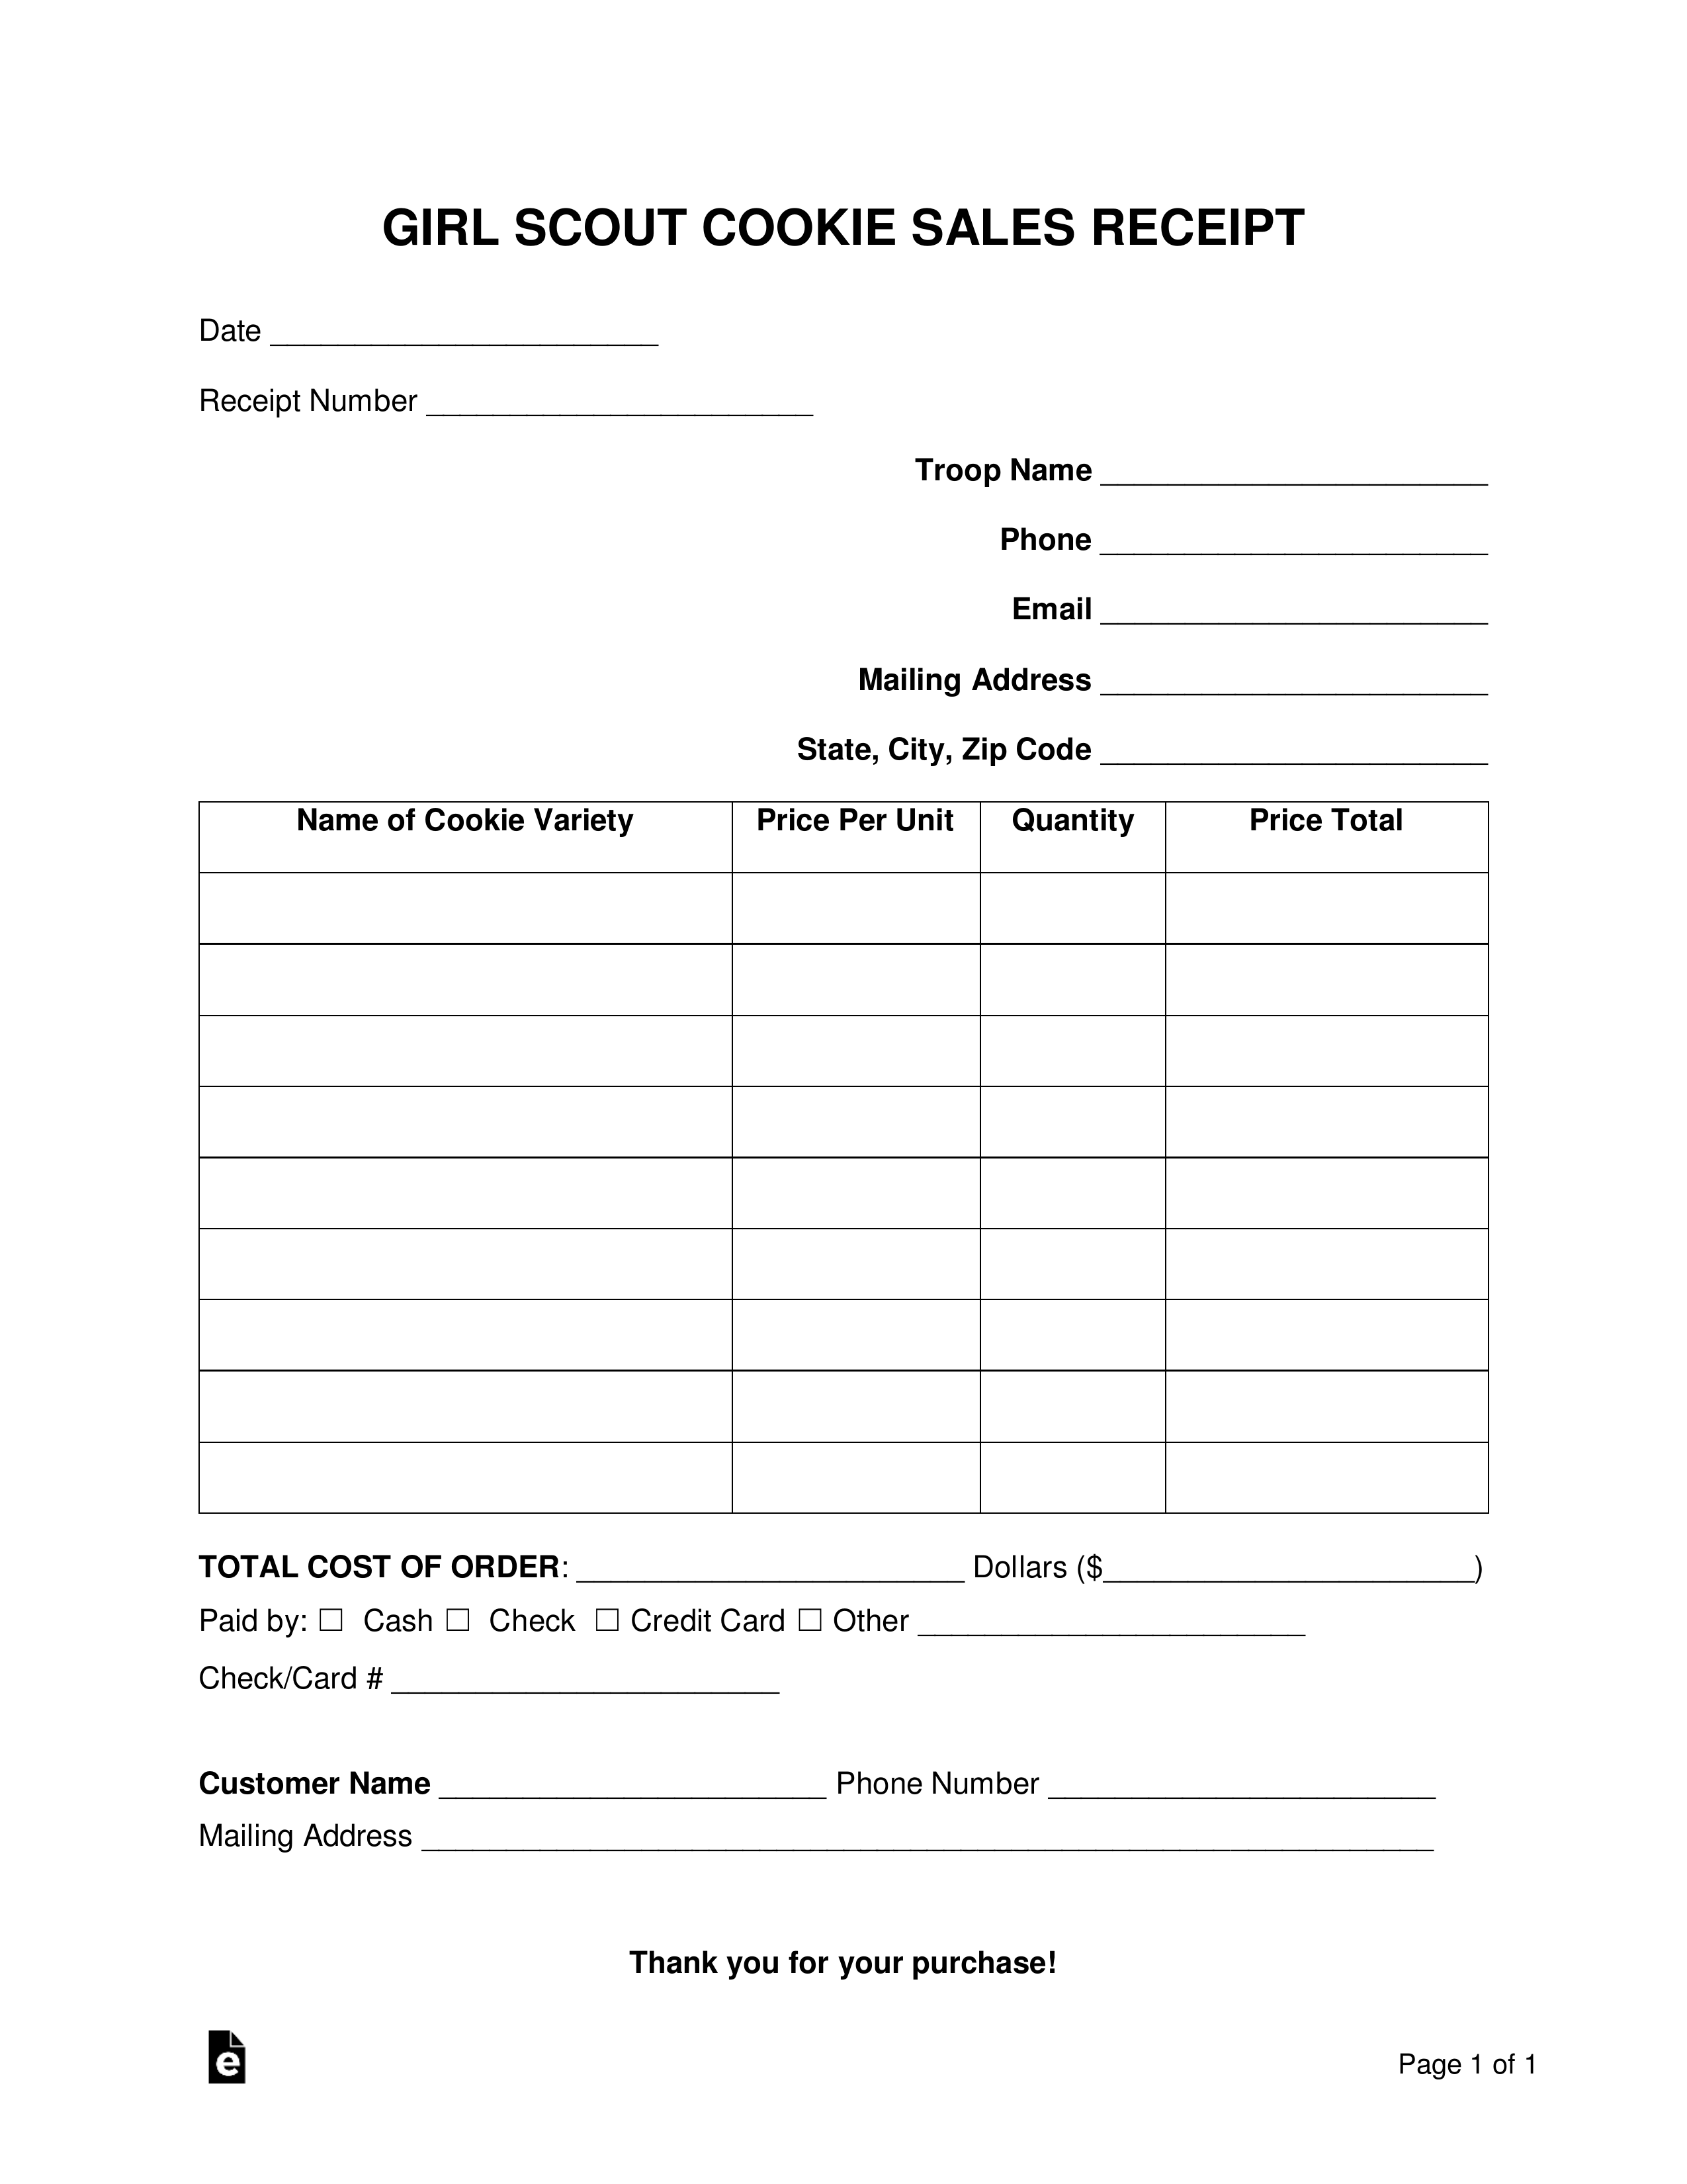 printable-girl-scout-cookie-order-form-2020-pdf-tutore-org-master-of-documents